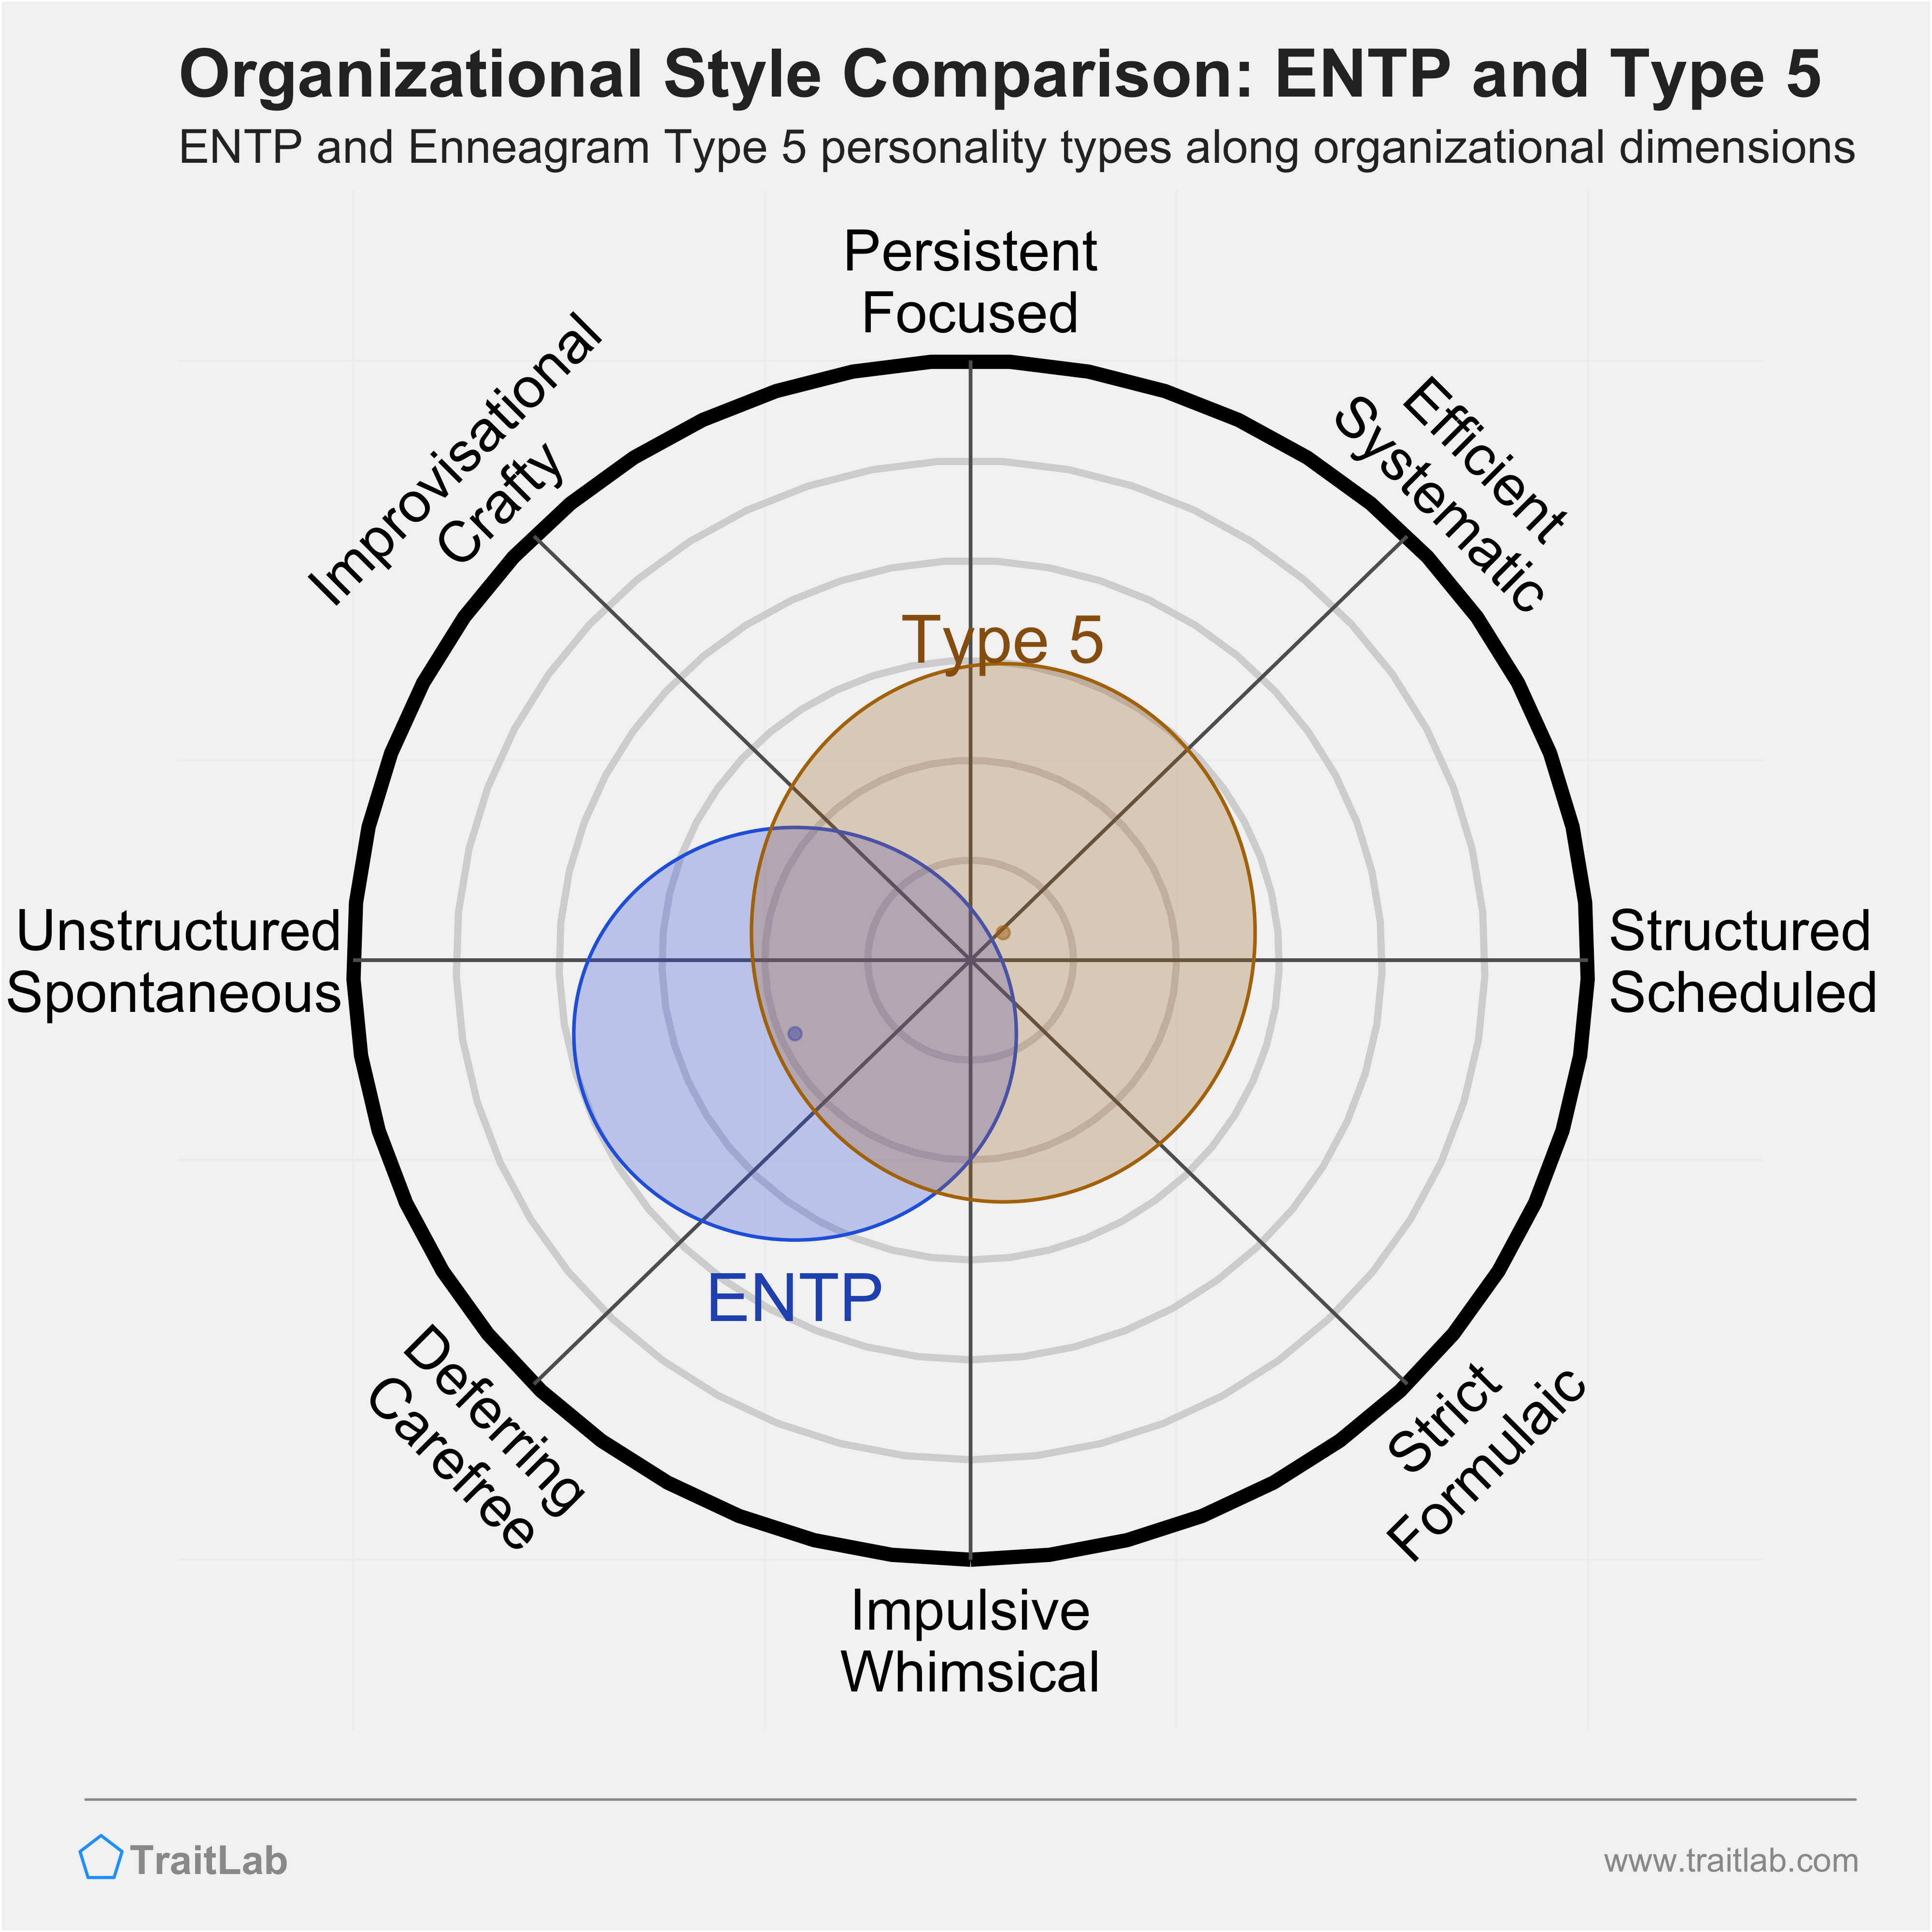 ENTP and Type 5 comparison across organizational dimensions